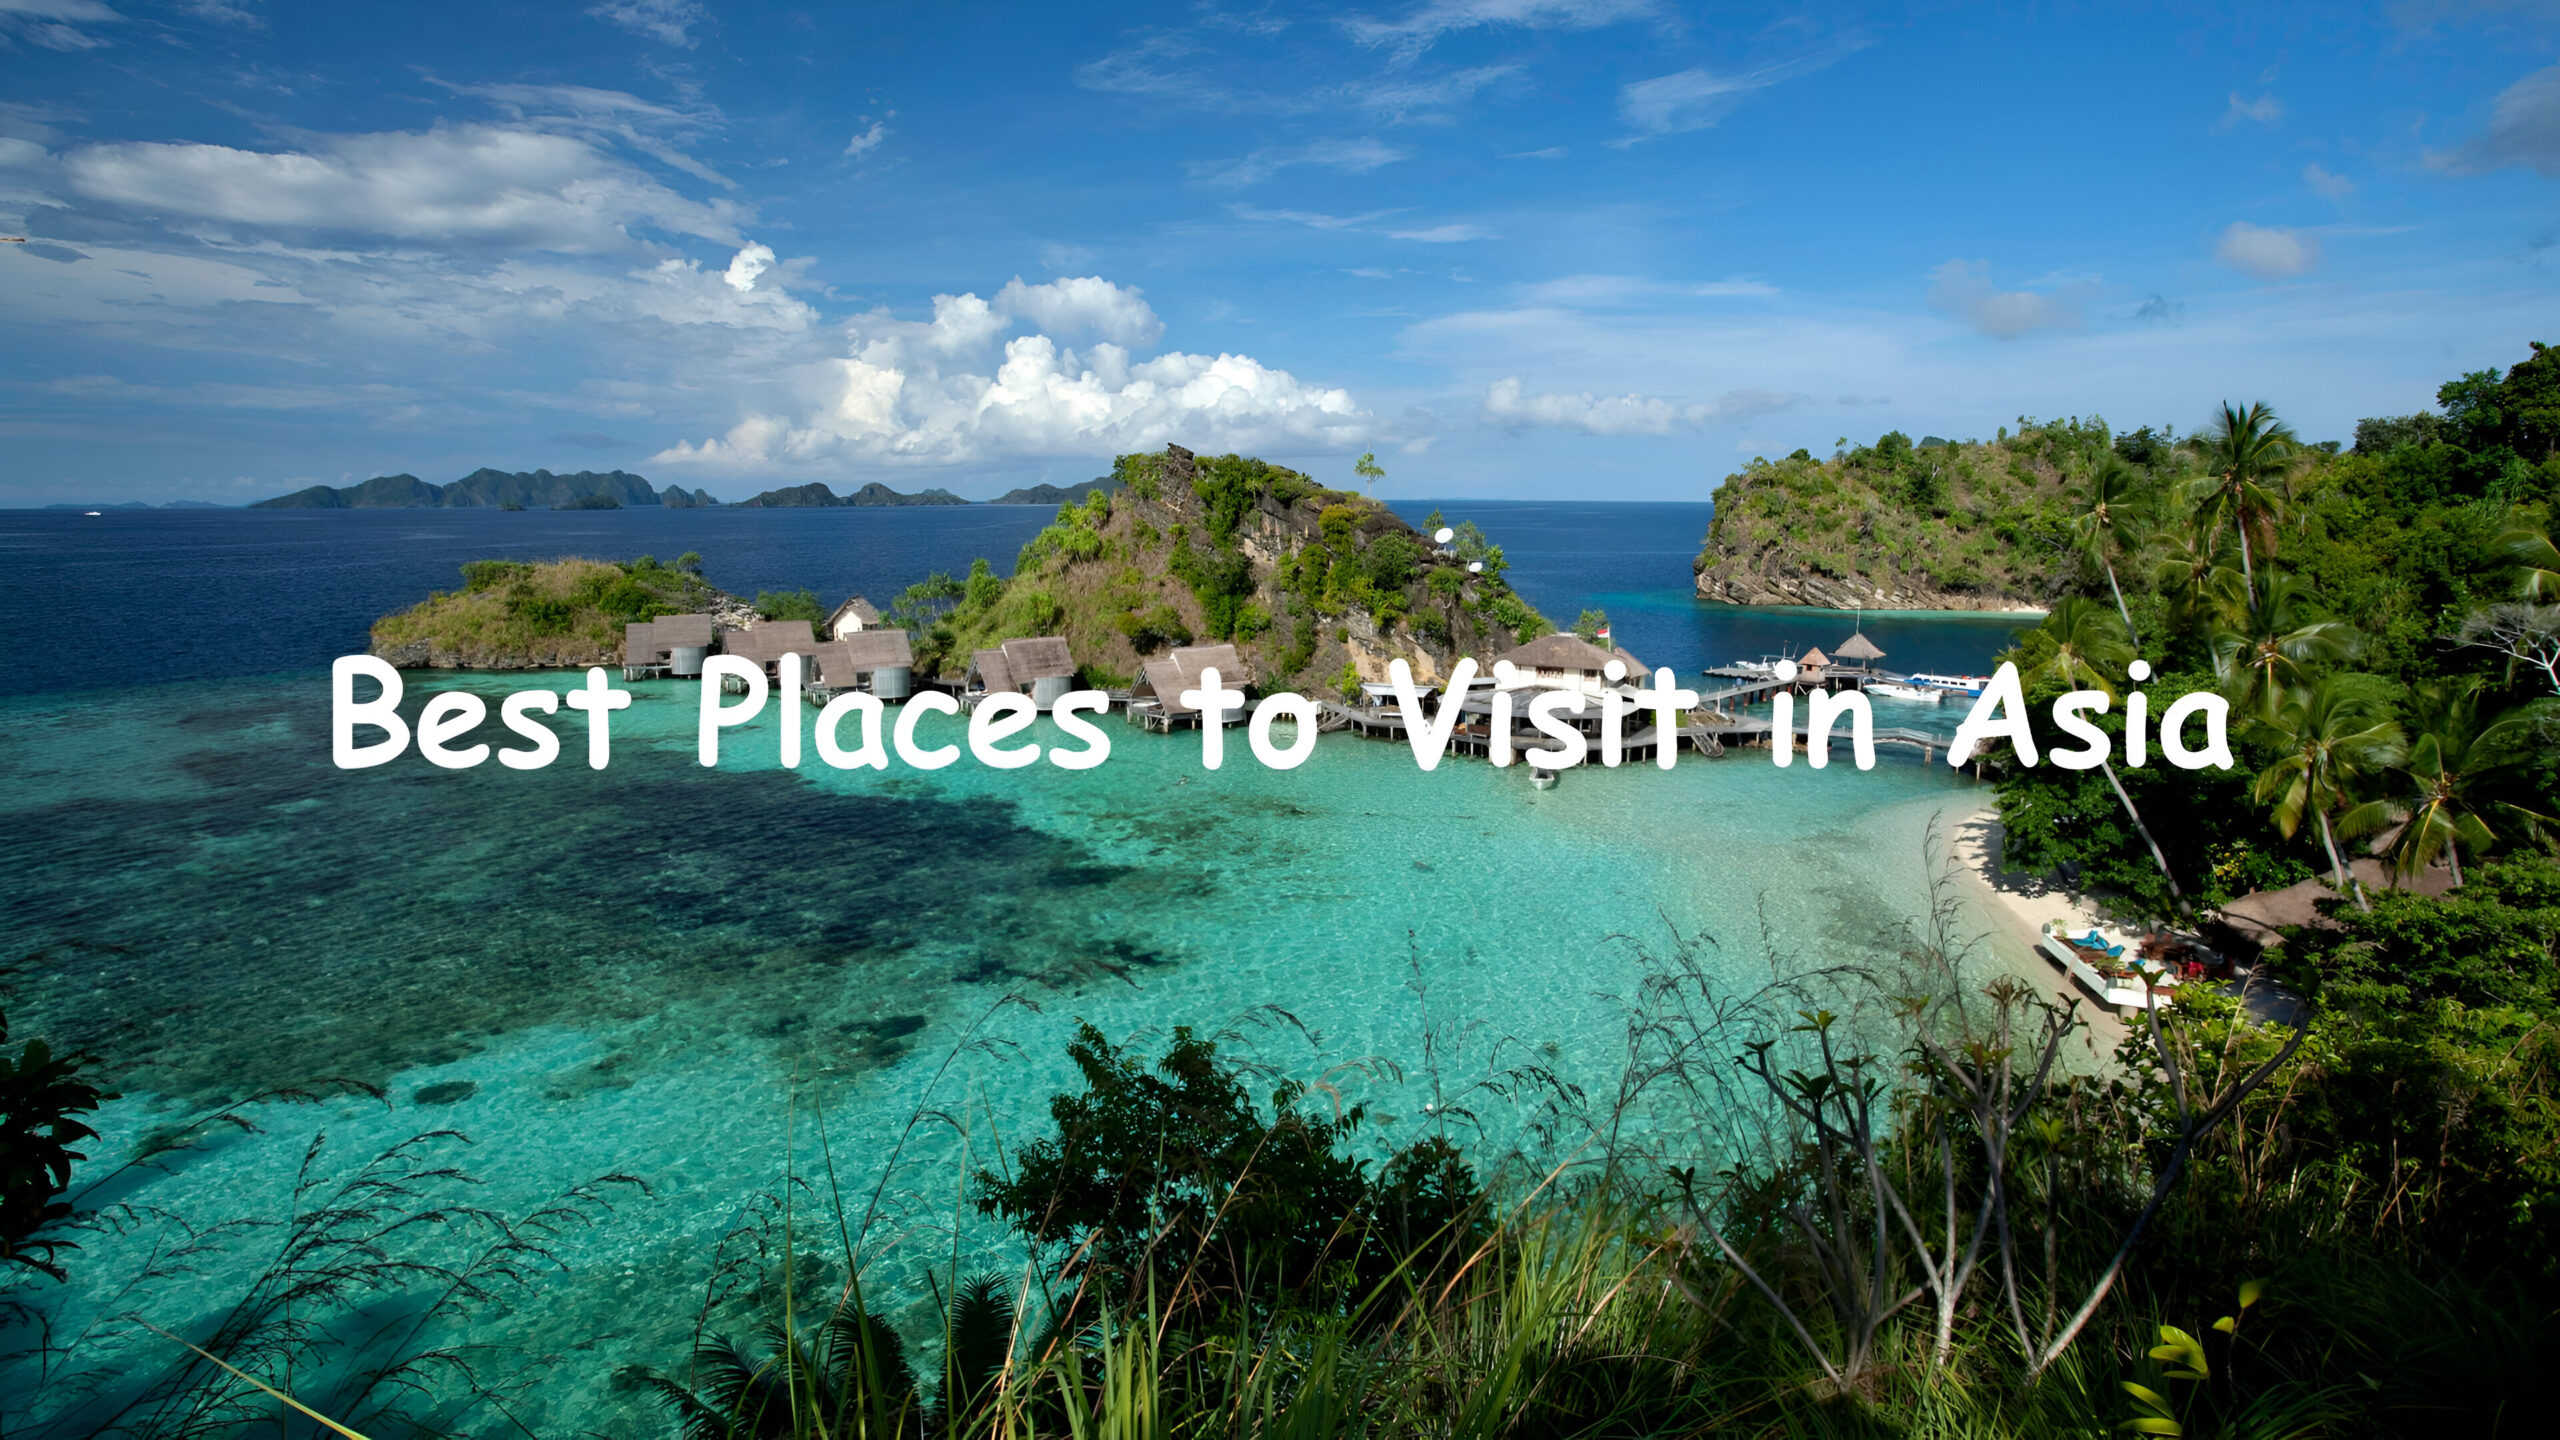 Custom Image of best places to visit in Asia